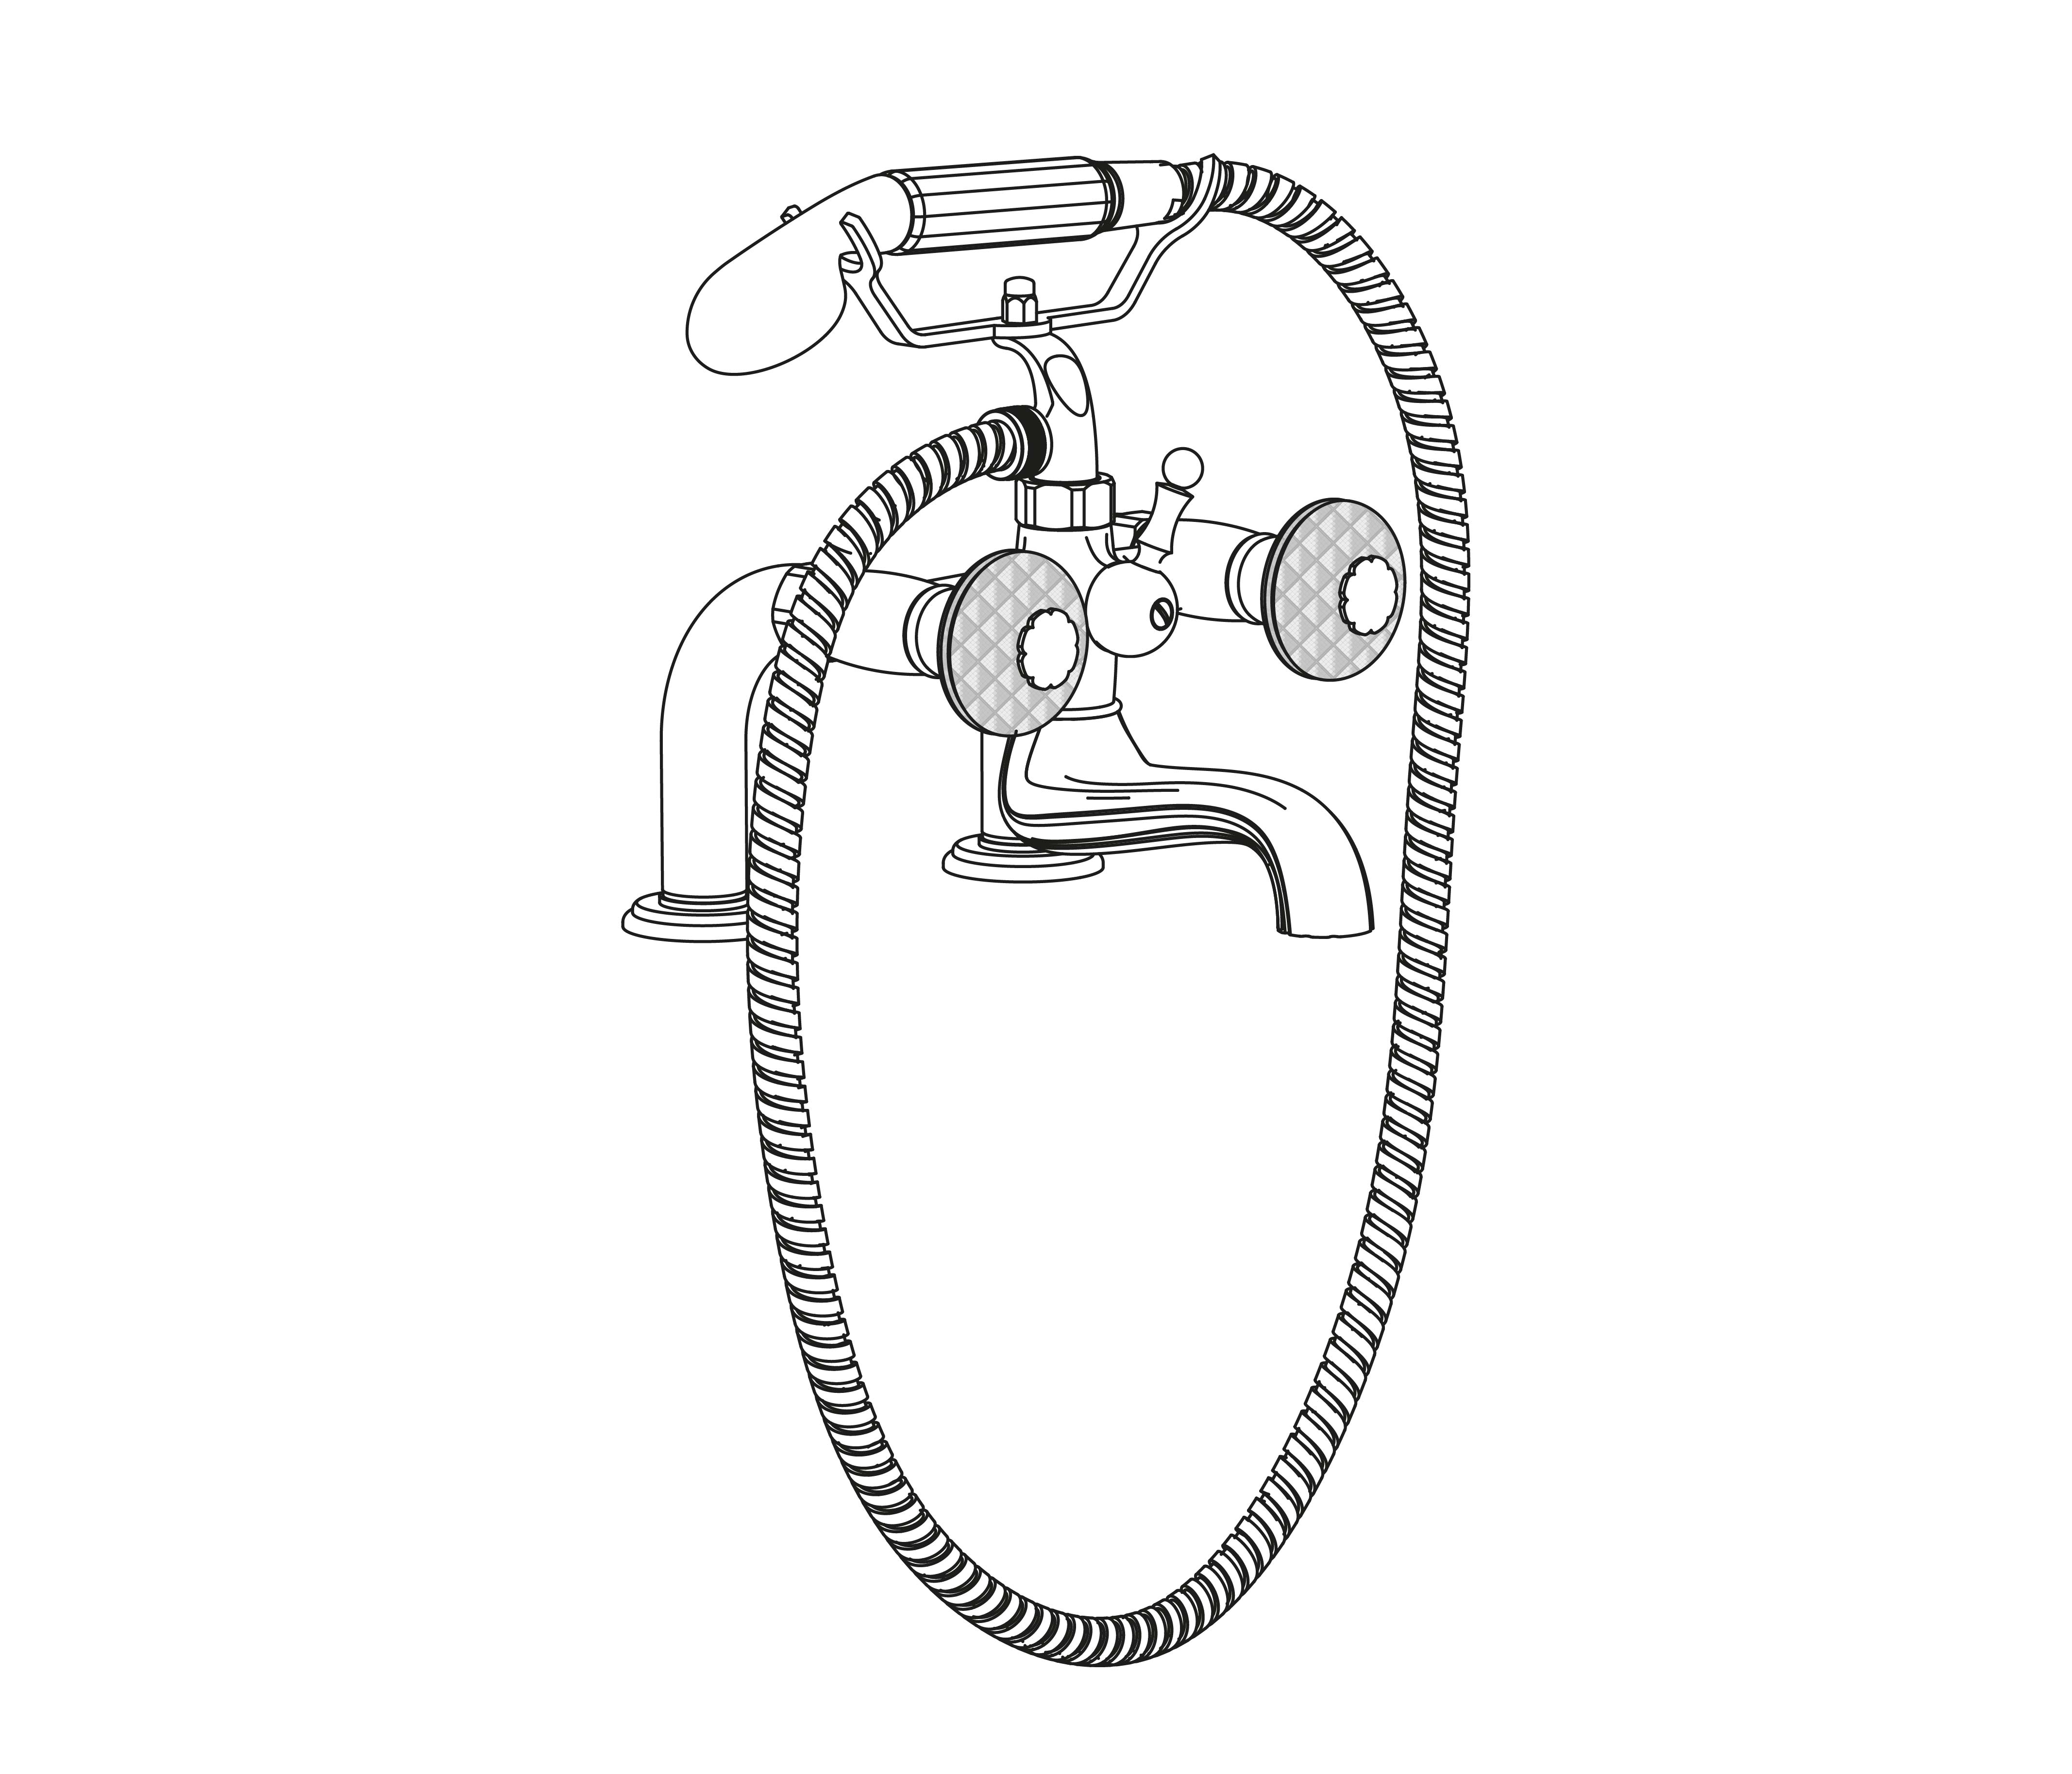 C53-3306 Rim mounted bath and shower mixer